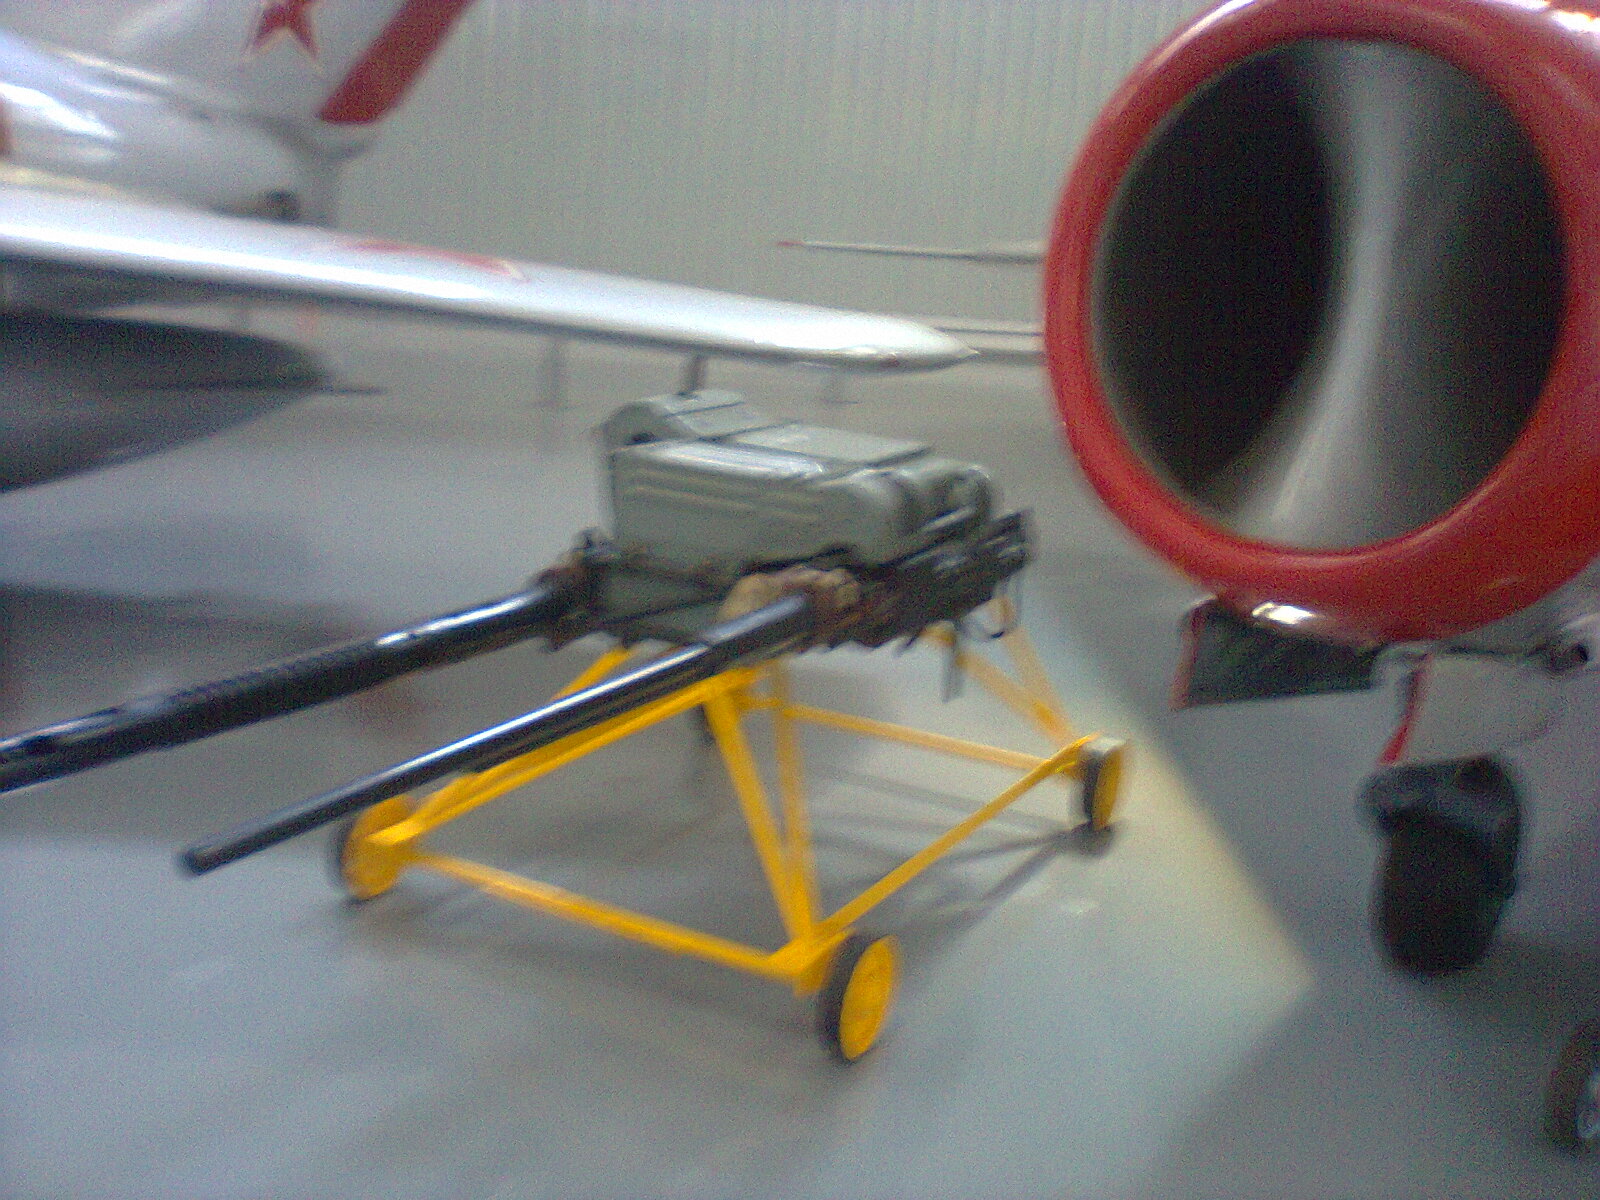 A plane cannon. Probably from one of the MiGs